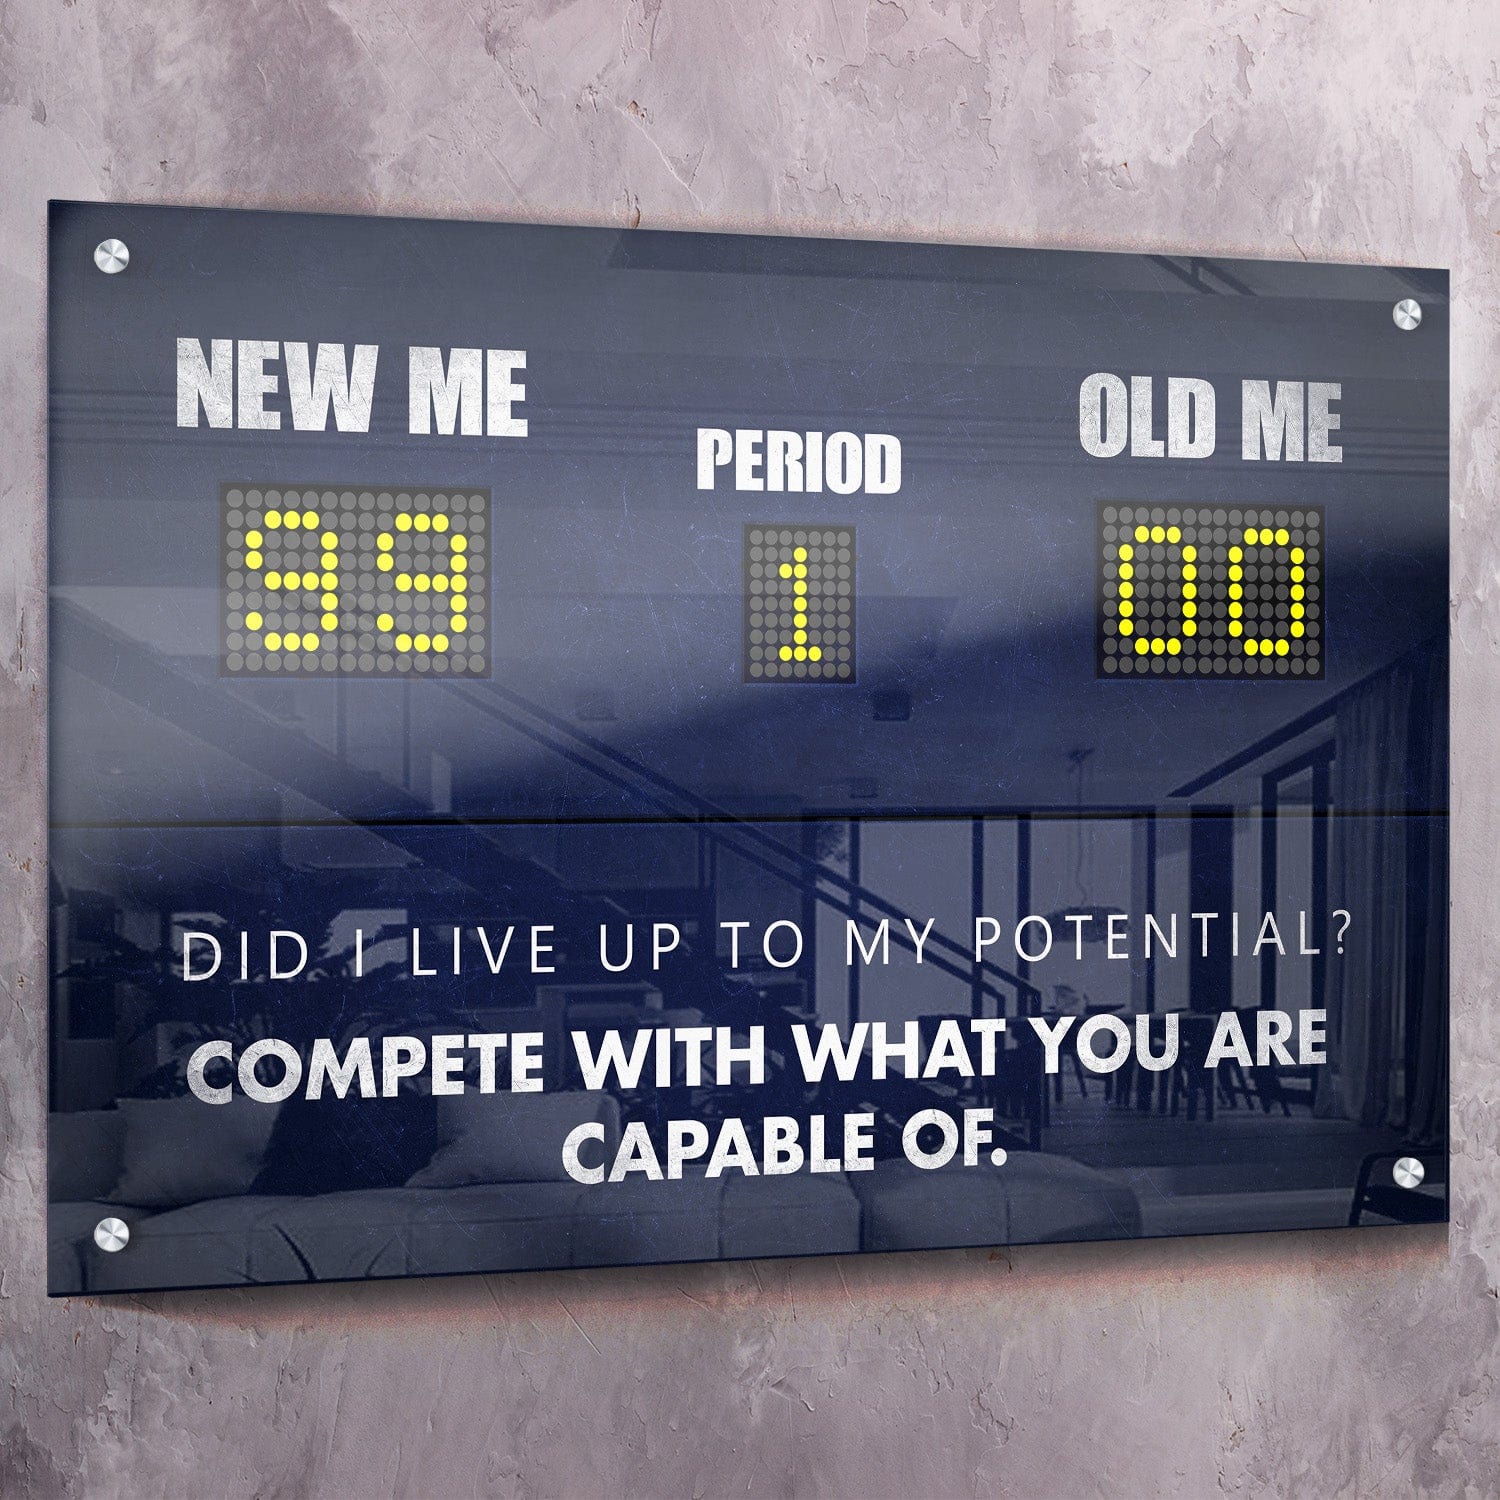 Compete with What You Are Capable of Scoreboard - Michael Jordan Inspired Quote Wall Art | Inspirational Wall Art Motivational Wall Art Quotes Office Art | ImpaktMaker Exclusive Canvas Art Landscape